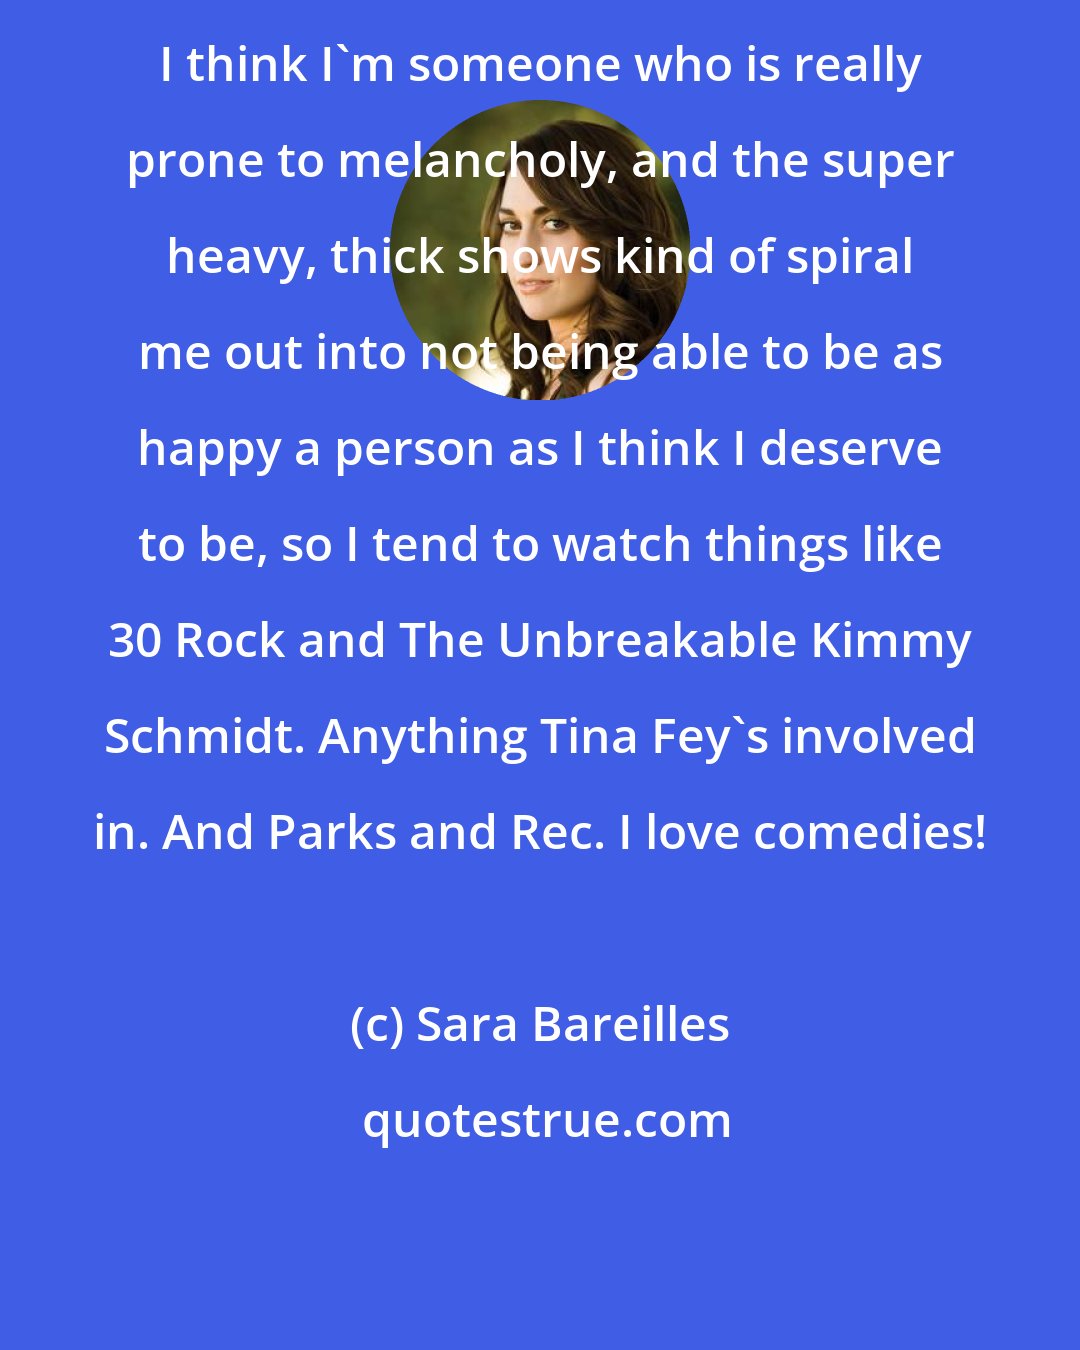 Sara Bareilles: I think I'm someone who is really prone to melancholy, and the super heavy, thick shows kind of spiral me out into not being able to be as happy a person as I think I deserve to be, so I tend to watch things like 30 Rock and The Unbreakable Kimmy Schmidt. Anything Tina Fey's involved in. And Parks and Rec. I love comedies!